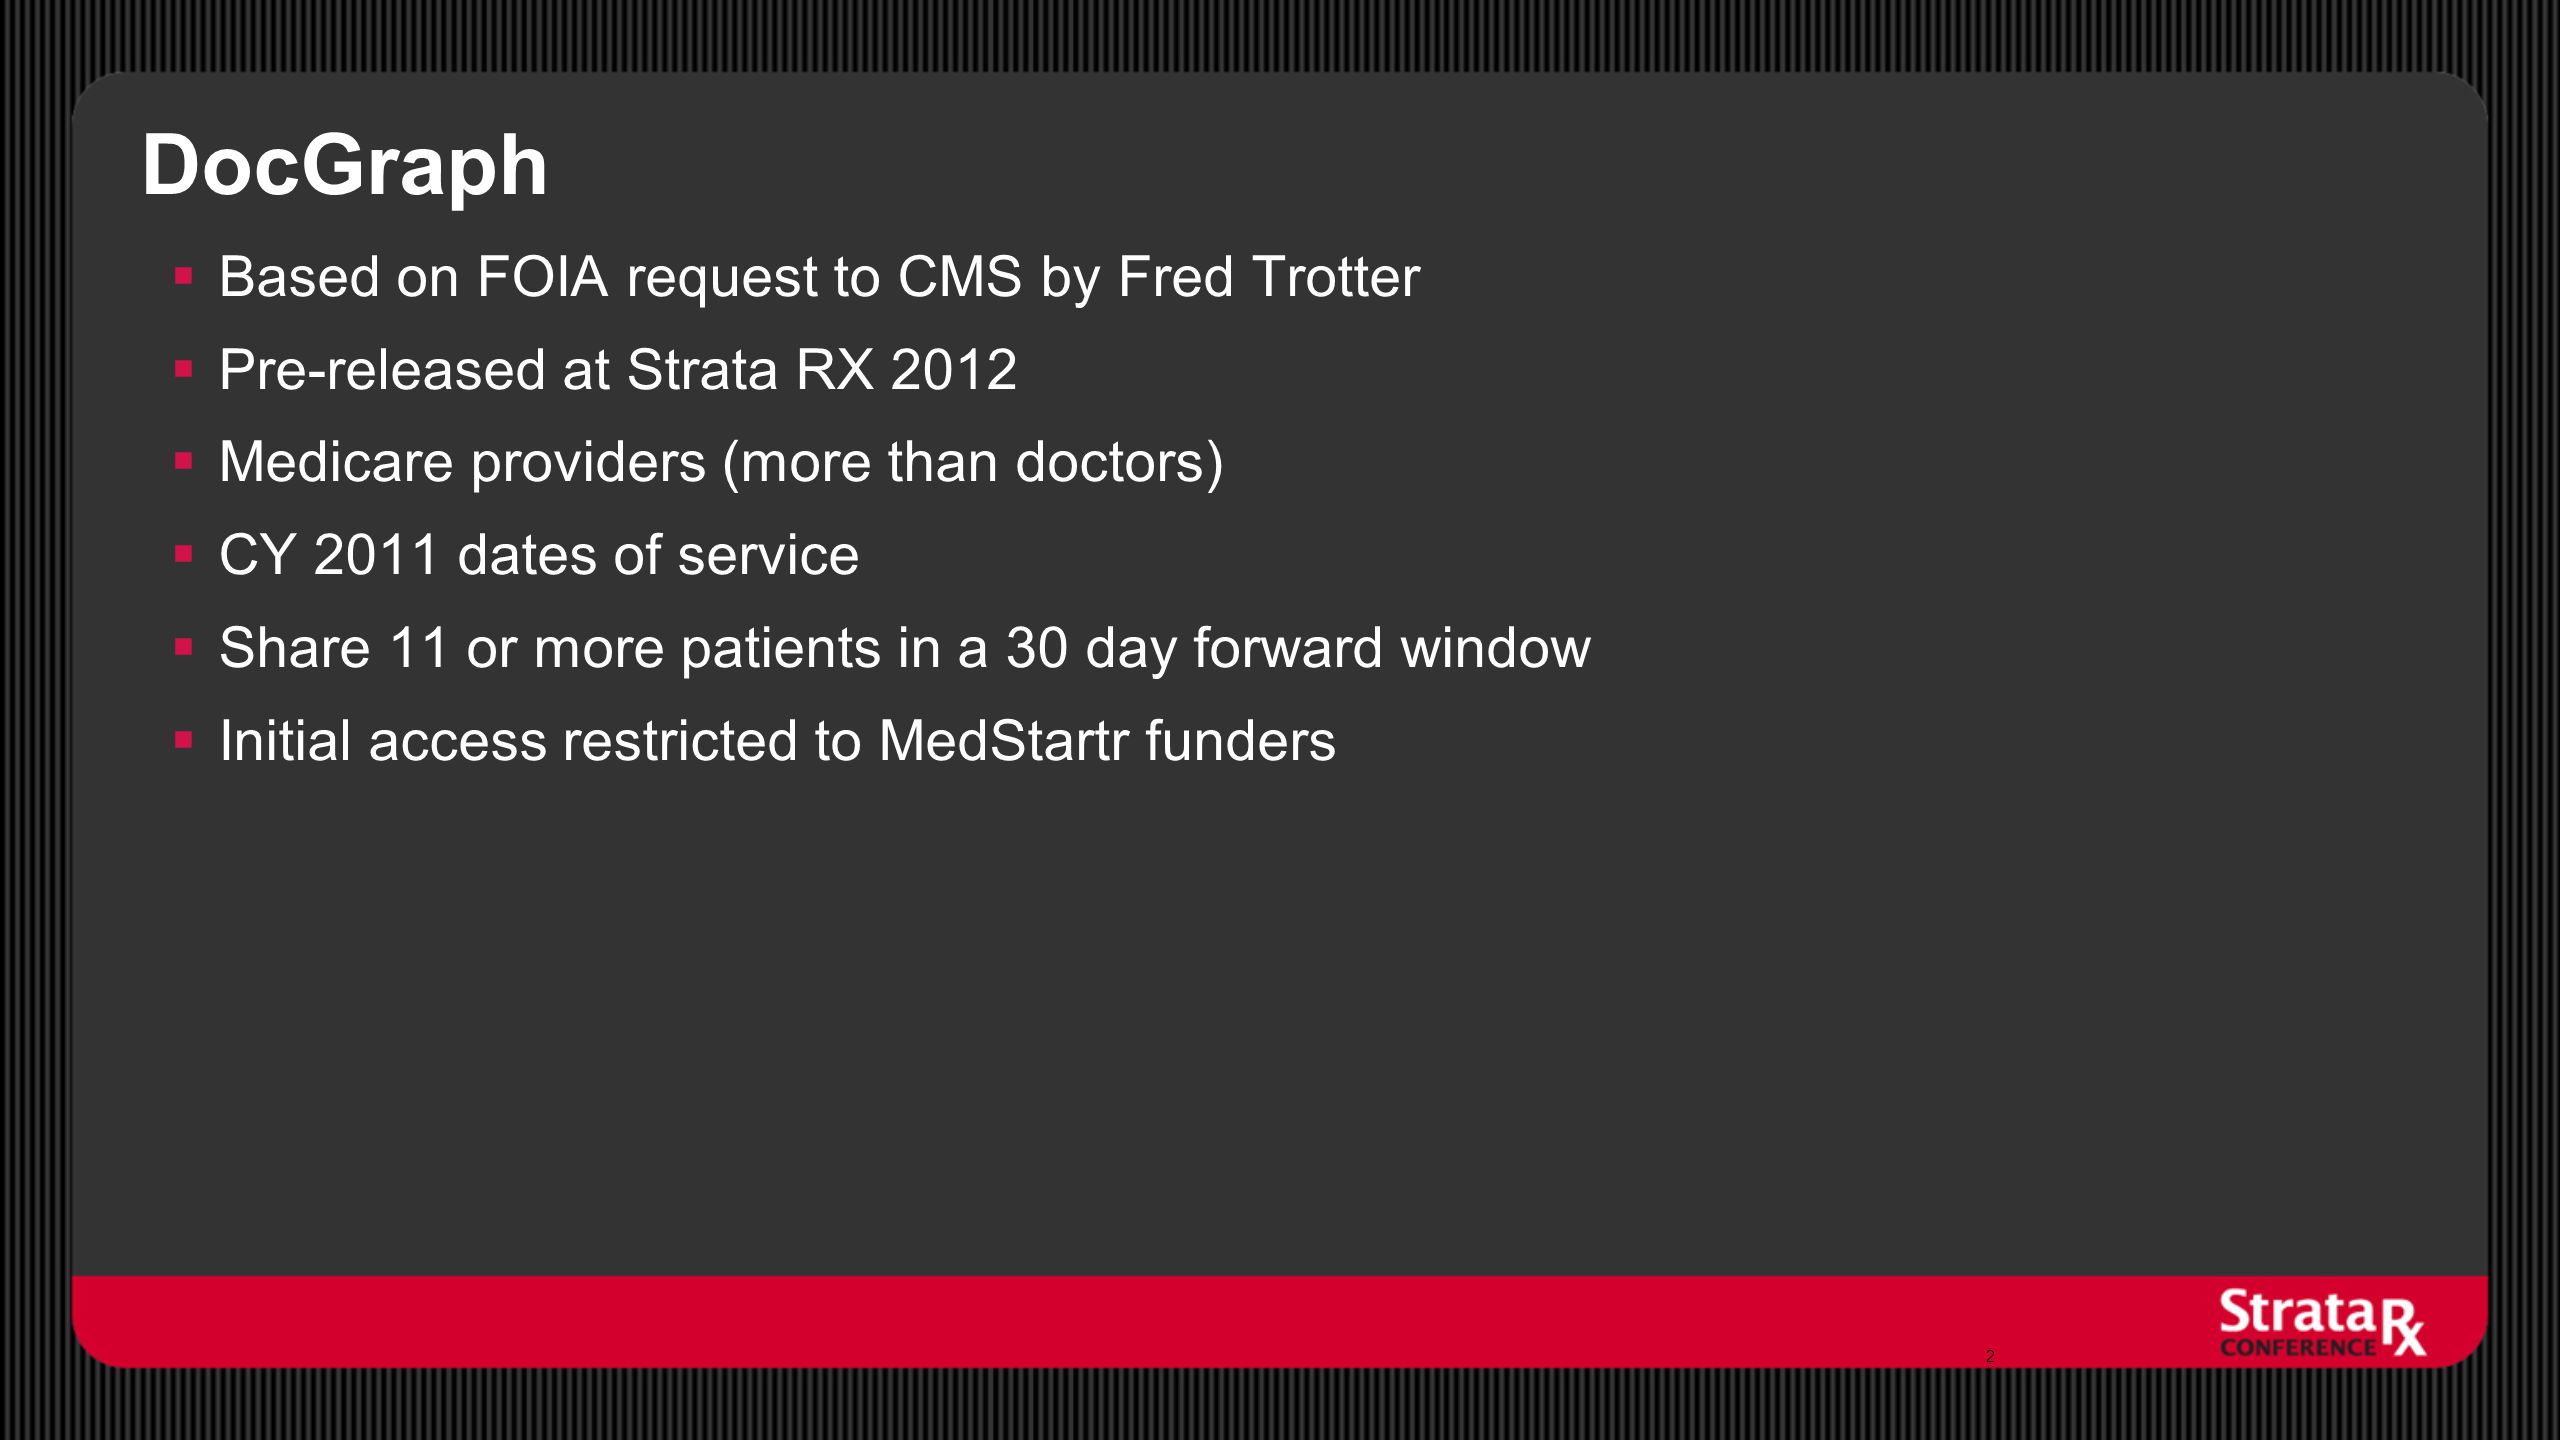 DocGraph  Based on FOIA request to CMS by Fred Trotter  Pre-released at Strata RX 2012  Medicare providers (more than doctors)  CY 2011 dates of service  Share 11 or more patients in a 30 day forward window  Initial access restricted to MedStartr funders 2